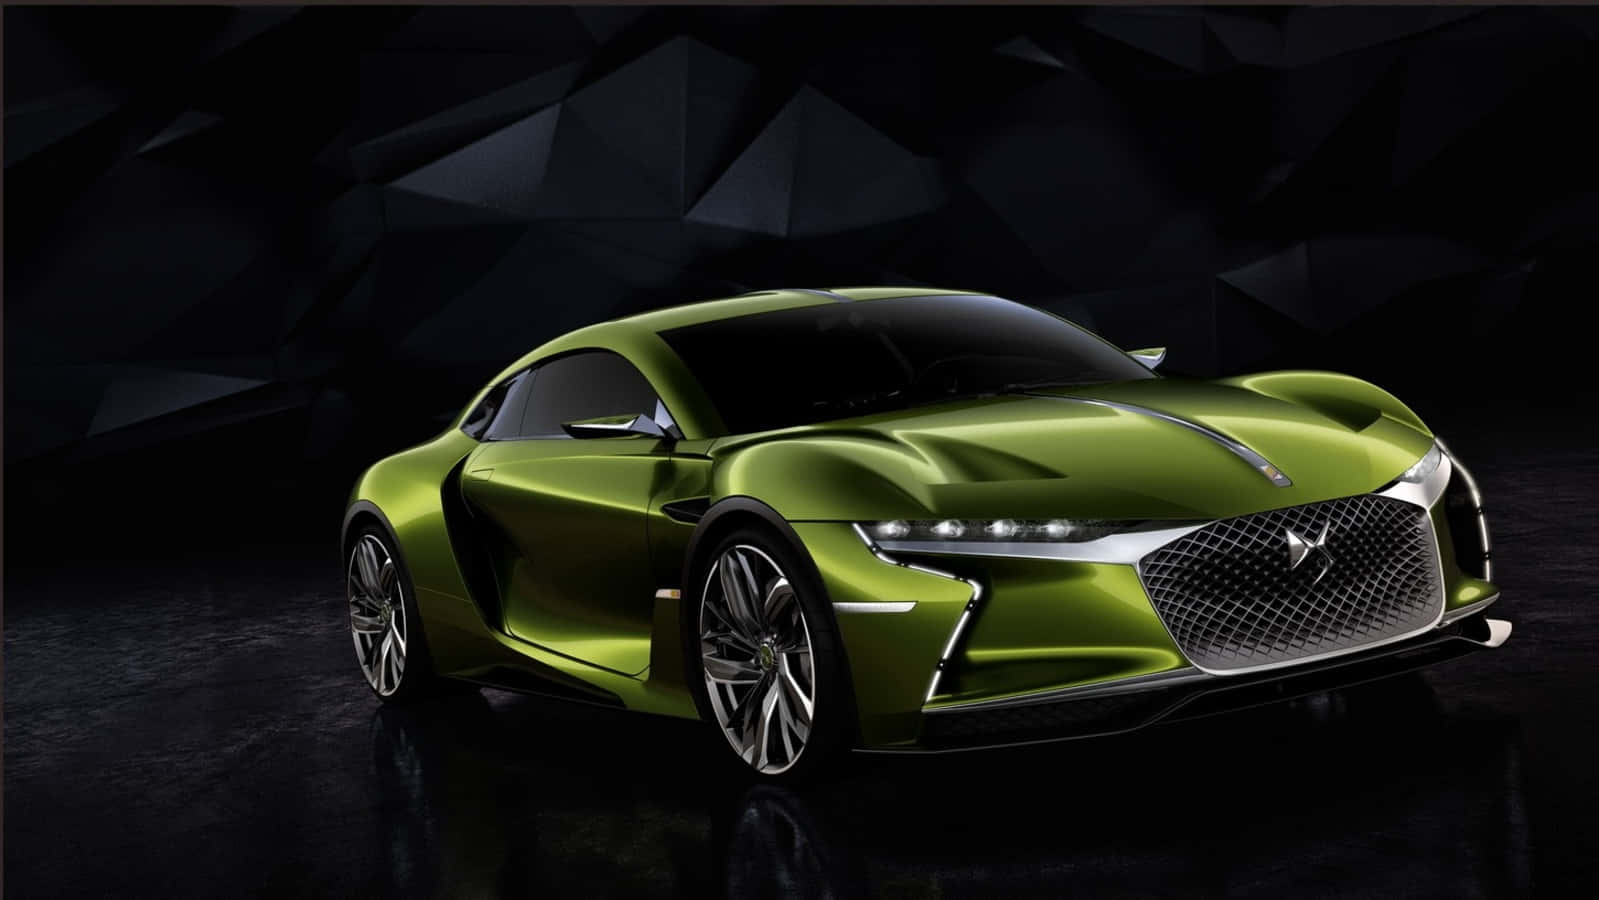 Caption: Striking Modern Design Of Ds Automobiles Ds E-tense On Display Wallpaper